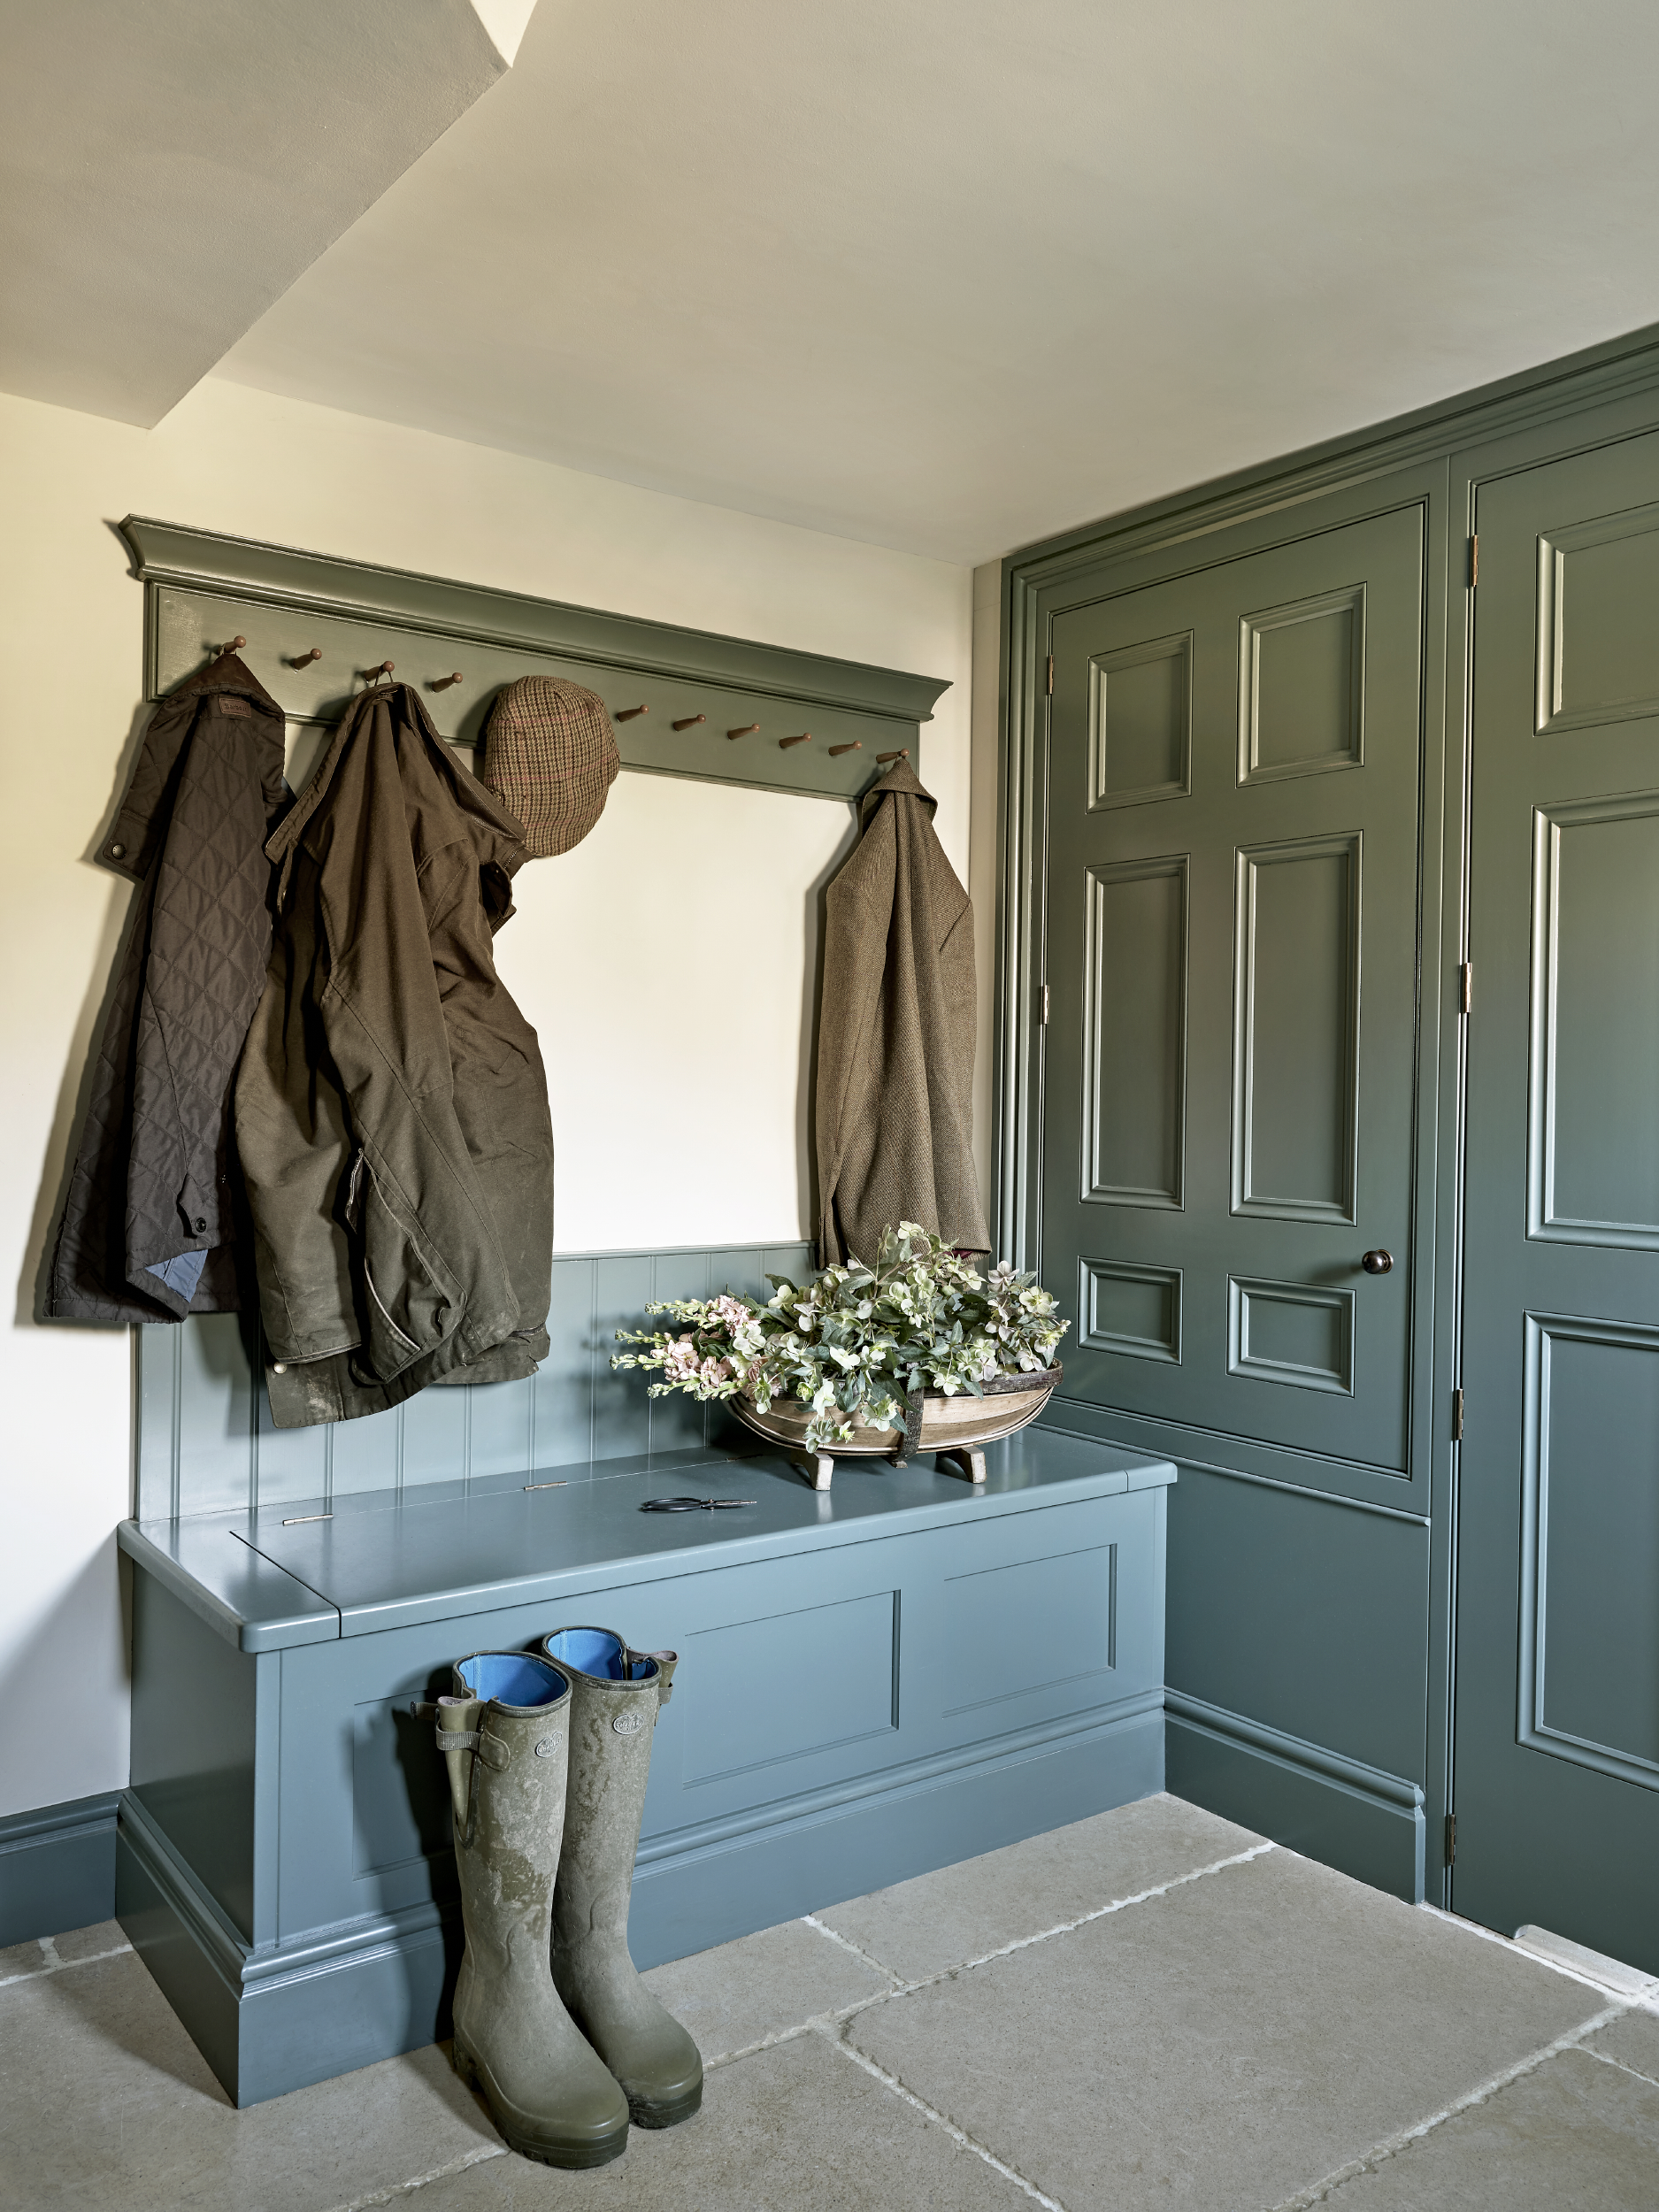 Cloakroom Modern Country Interior Design